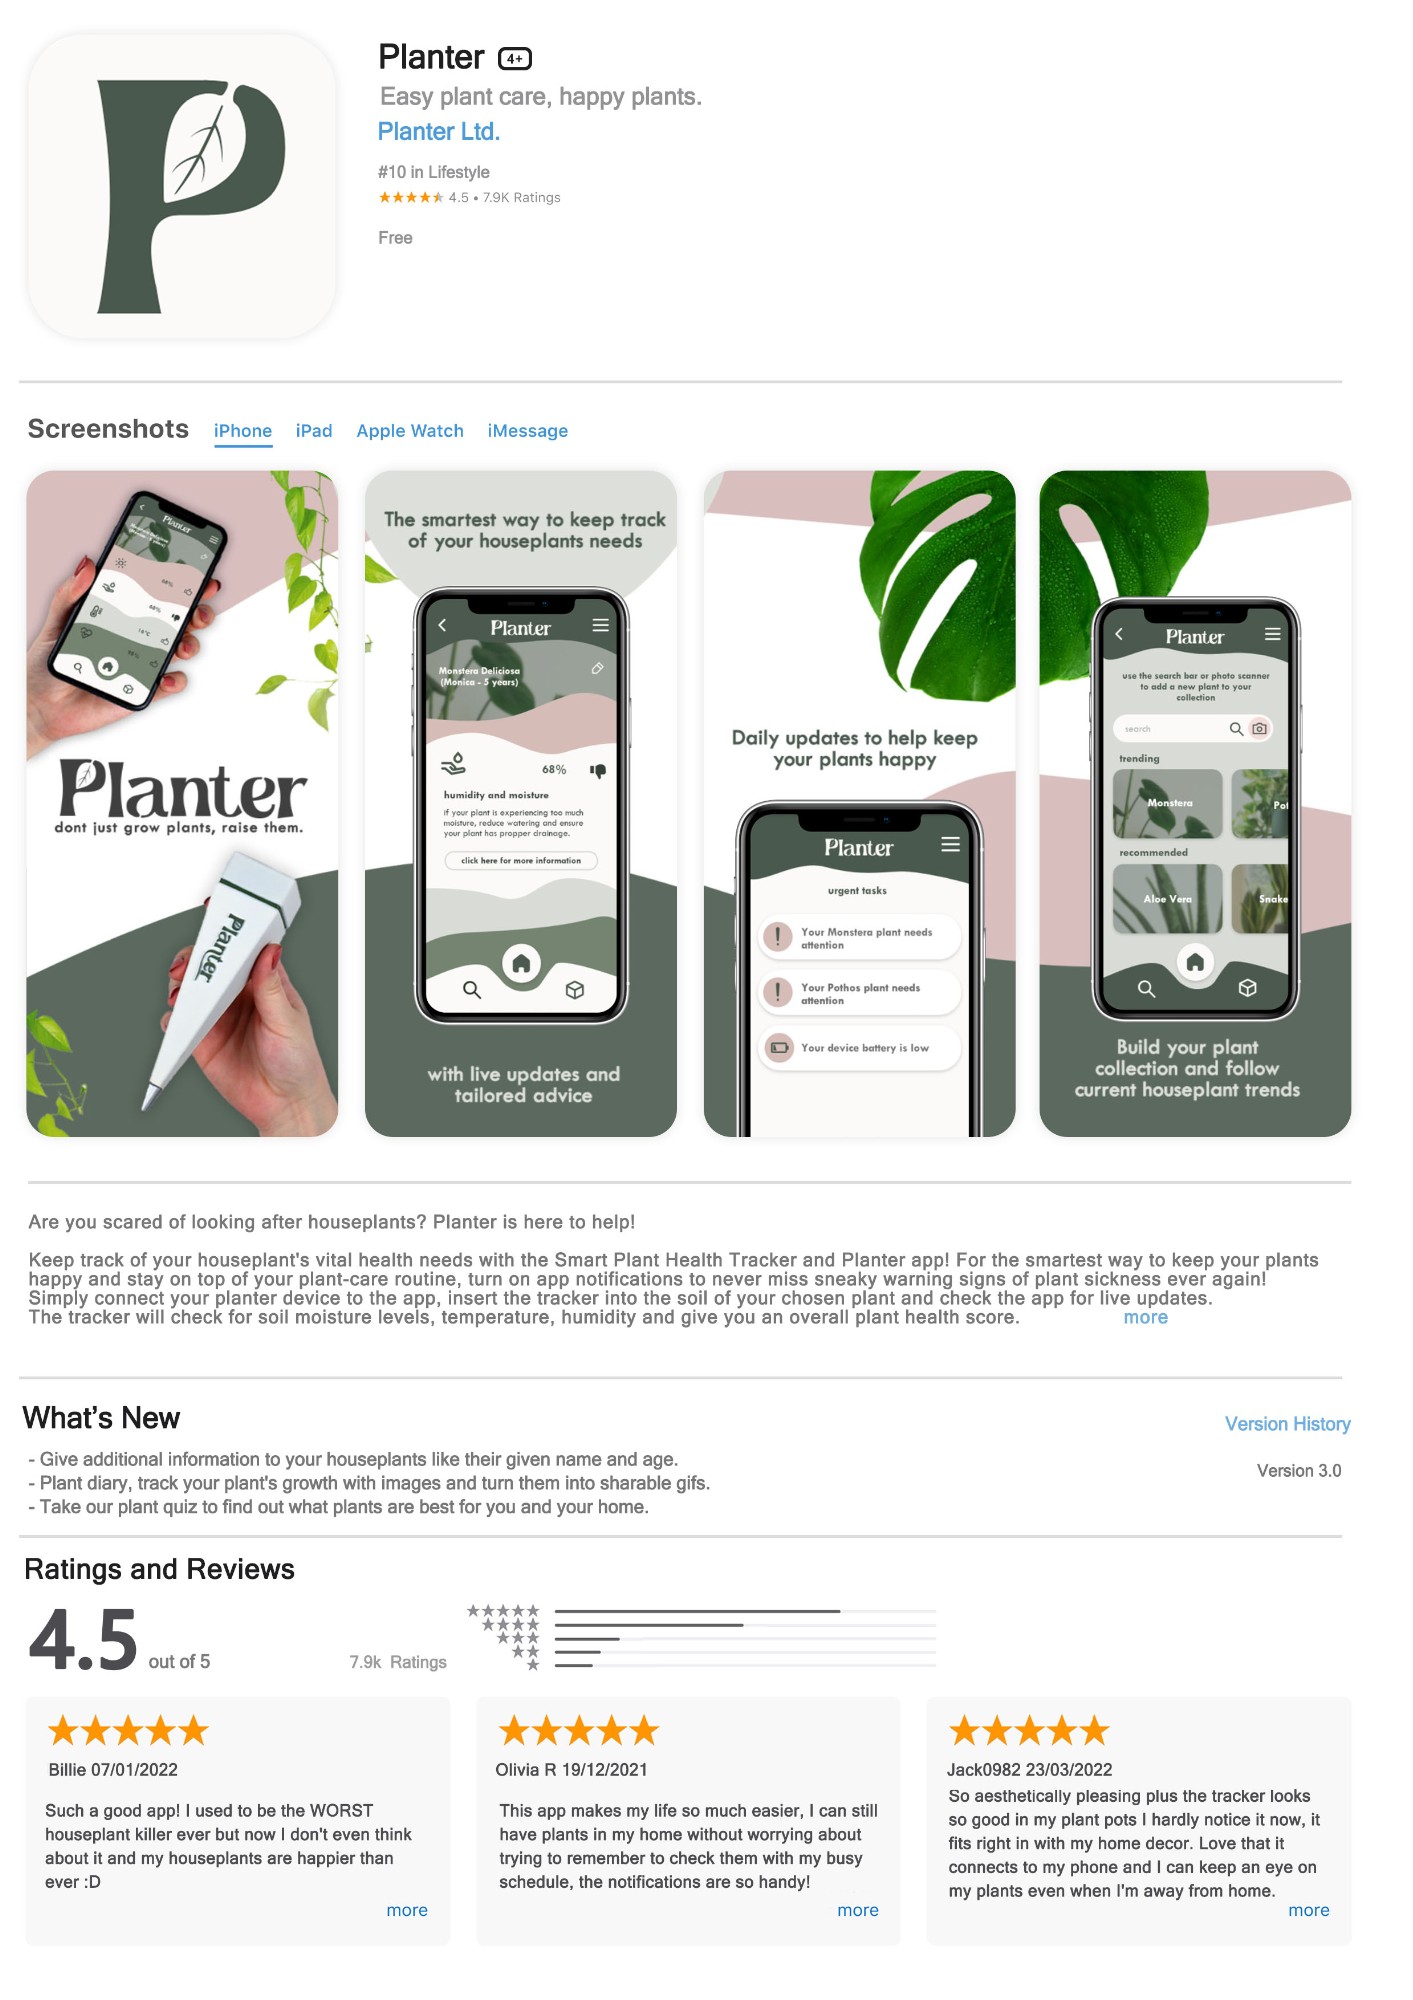 App store profile for the Planter app featuring images of the app pages and app description.